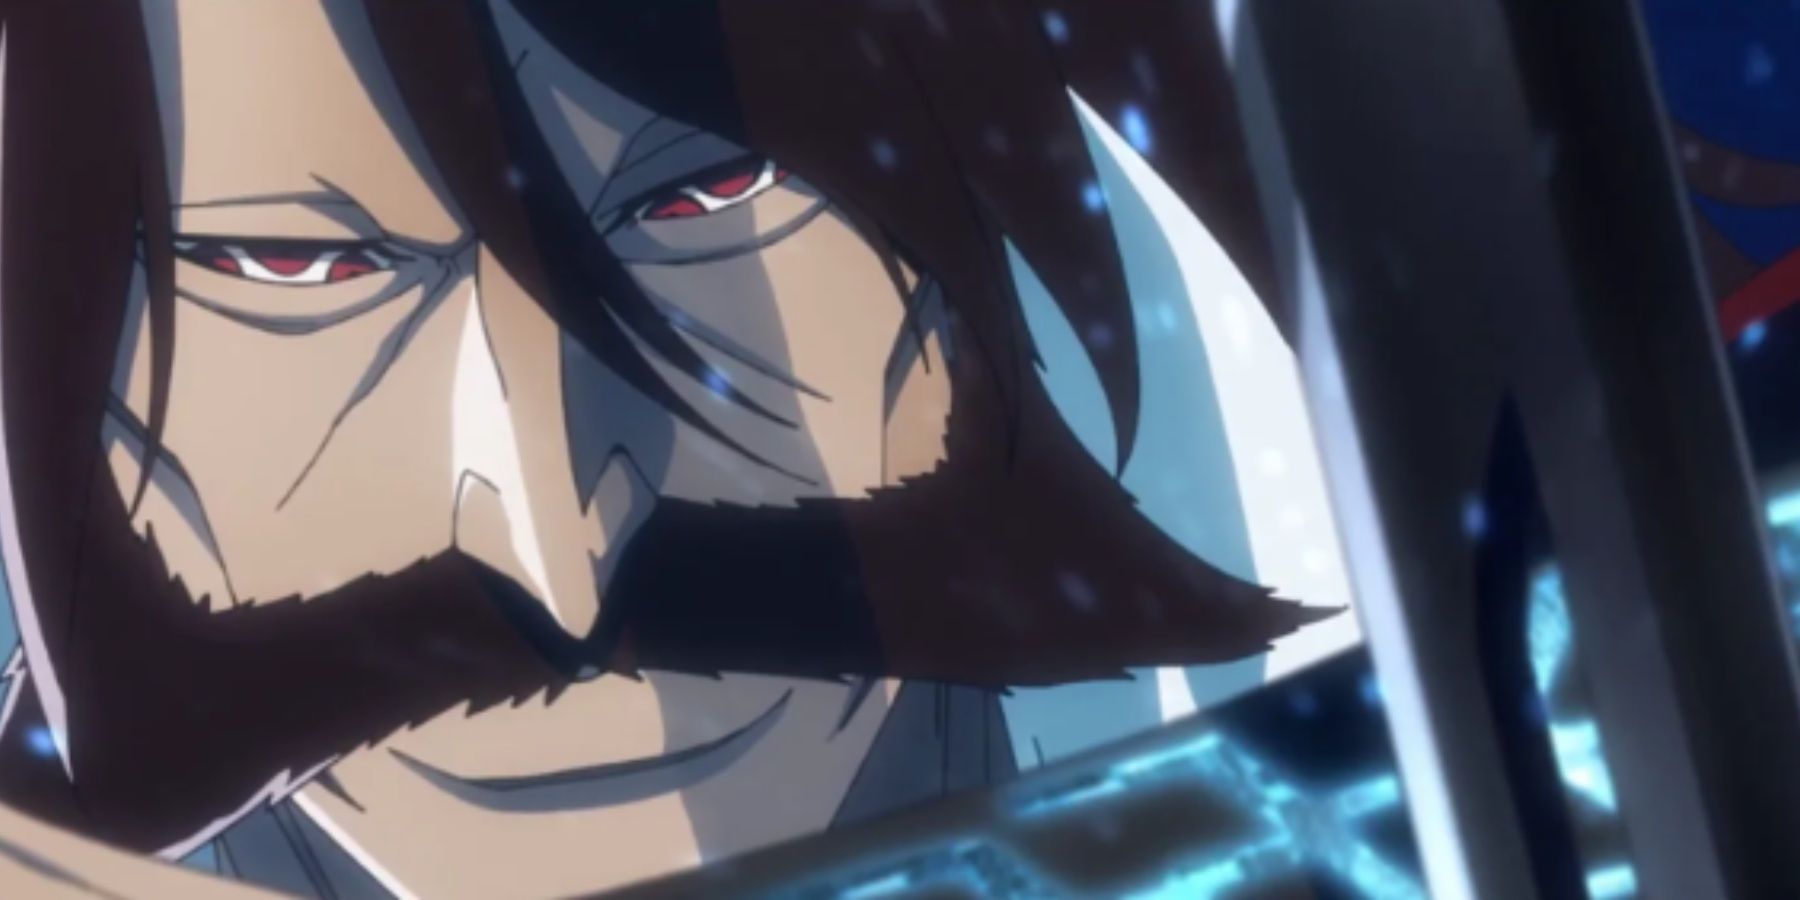 Yhwach using The Almighty and Blut Vein against Ichigo in the latest trailer of Bleach: The Thousand-Year Blood War